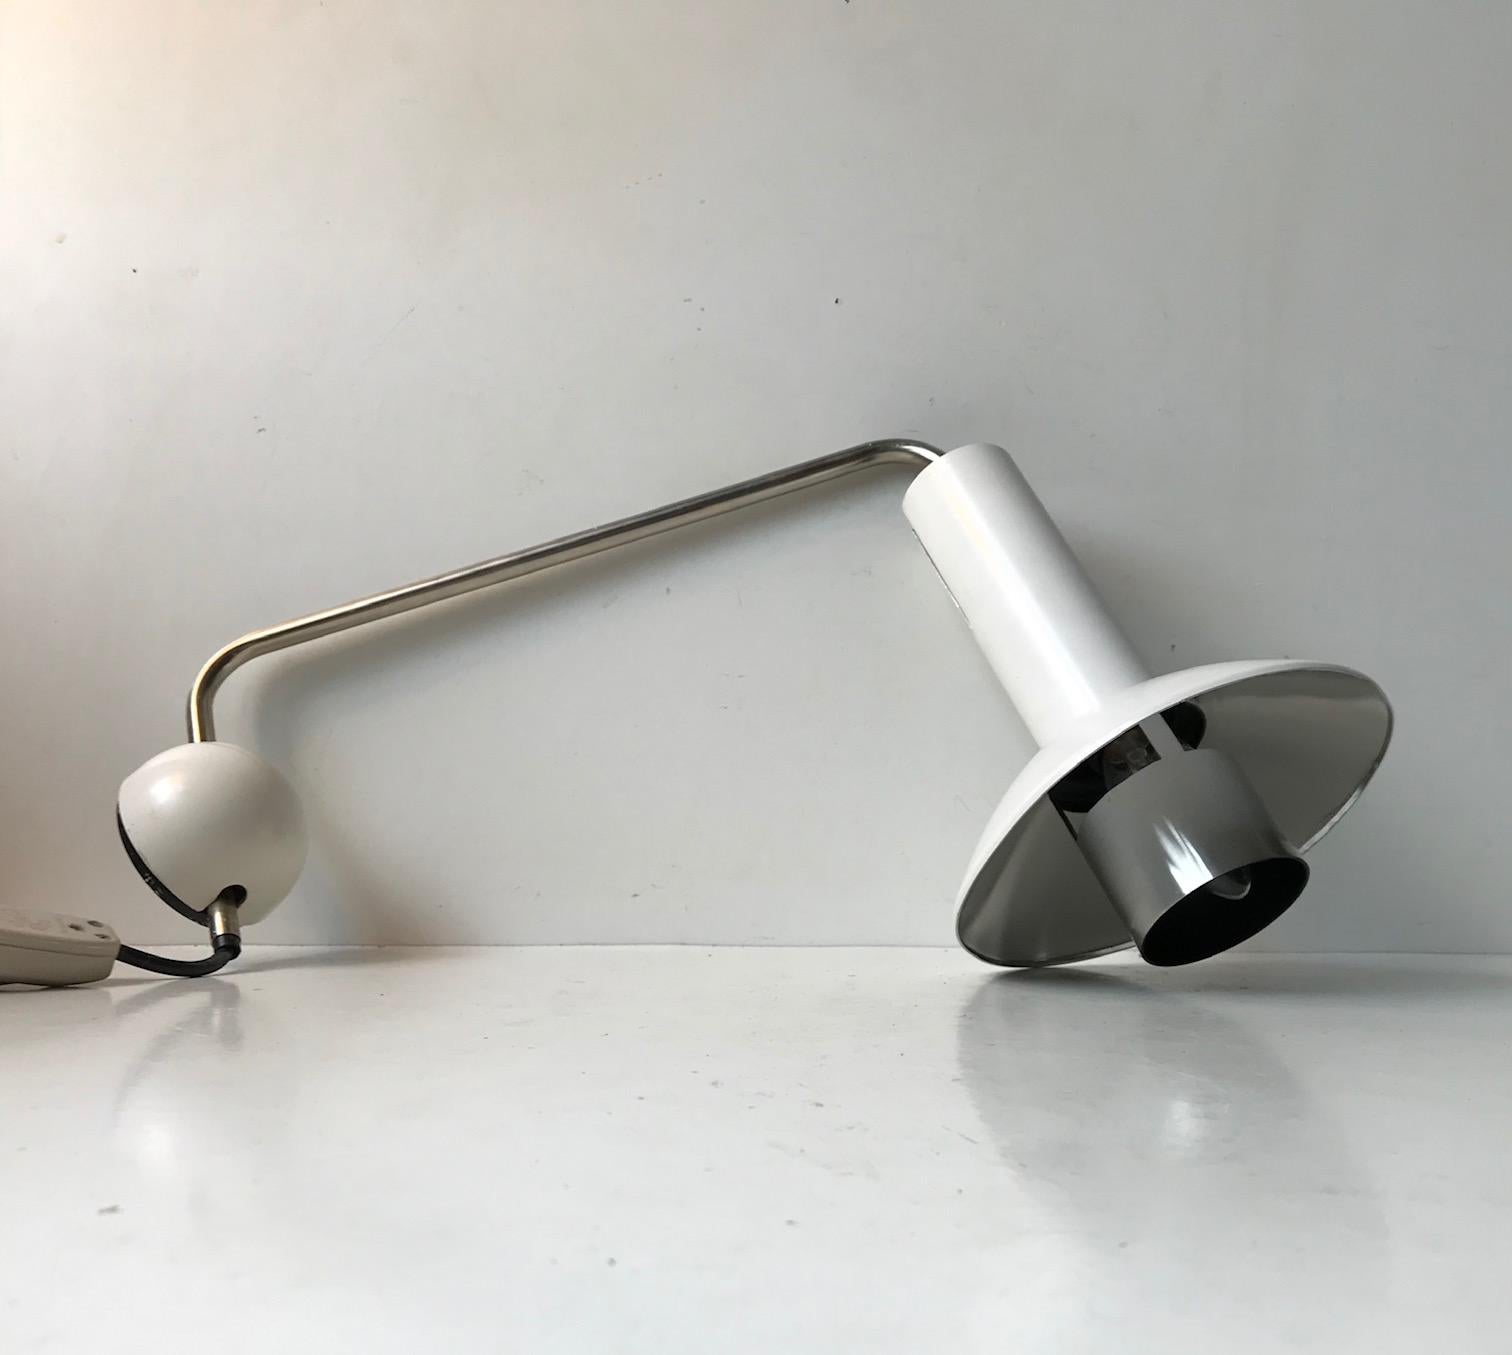 A rare sized white wall light designed and manufactured by Louis Poulsen in Denmark during the 1970s. This model - 132051 is called 'Louise' and is obviously derived from Louis in Louis Poulsen. This one is the 'largest' in the series because the